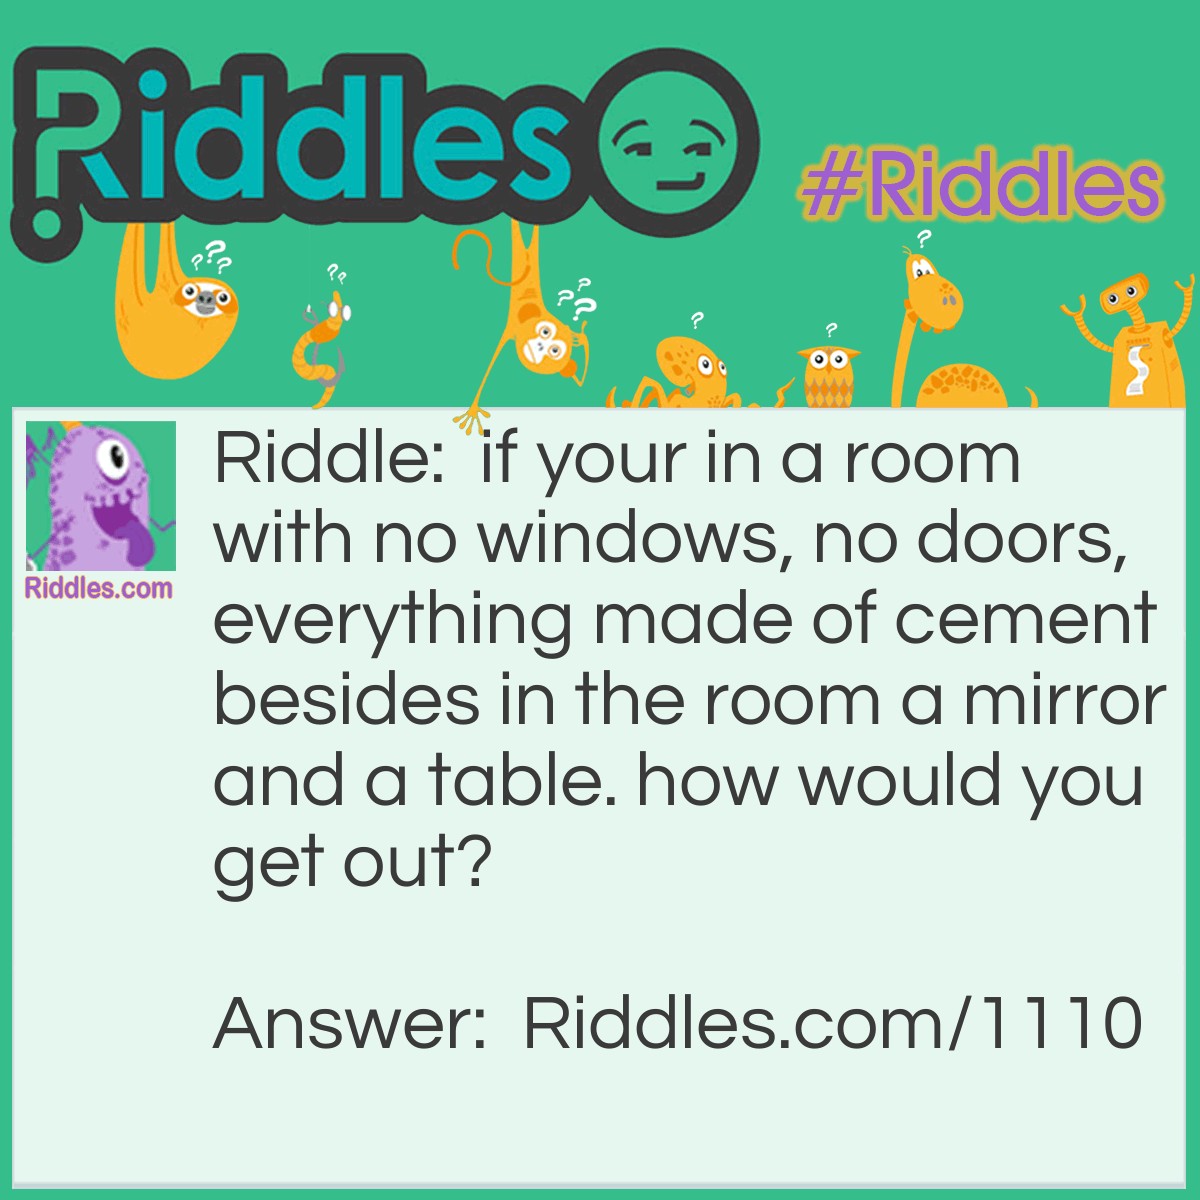 Riddle: if your in a room with no windows, no doors, everything made of cement besides in the room a mirror and a table. how would you get out? Answer: look in the mirror, see what you saw, take what you saw to saw the table in half, and 2 haves make a whole, so crawl through the hole